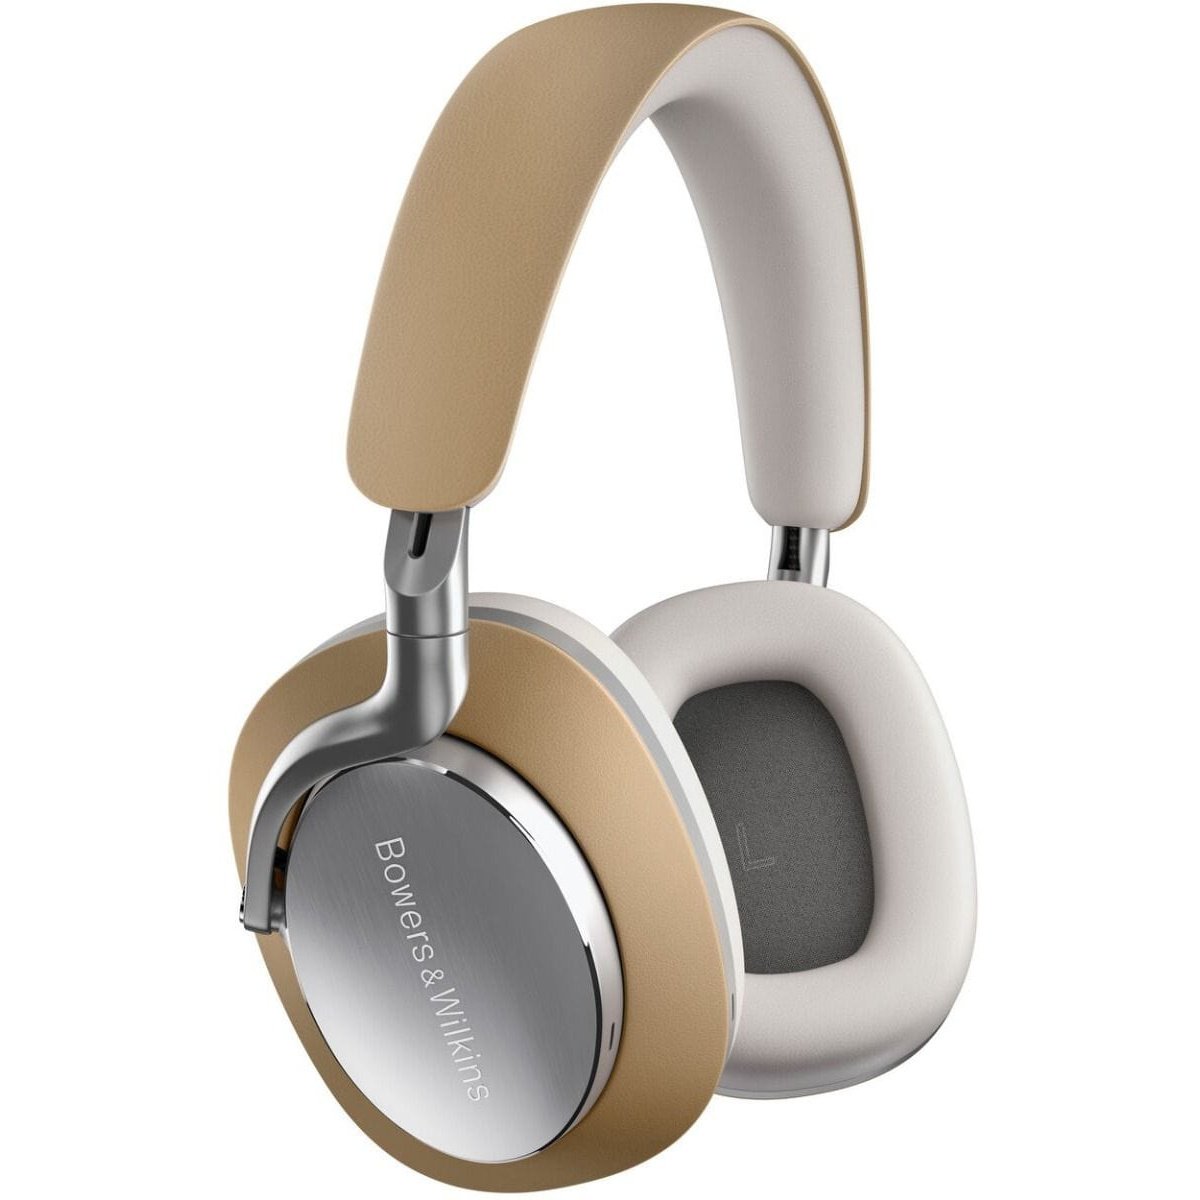 Bowers & Wilkins Bowers & Wilkins PX8 Luxury Noise Cancelling Headphones Headphones and Accessories